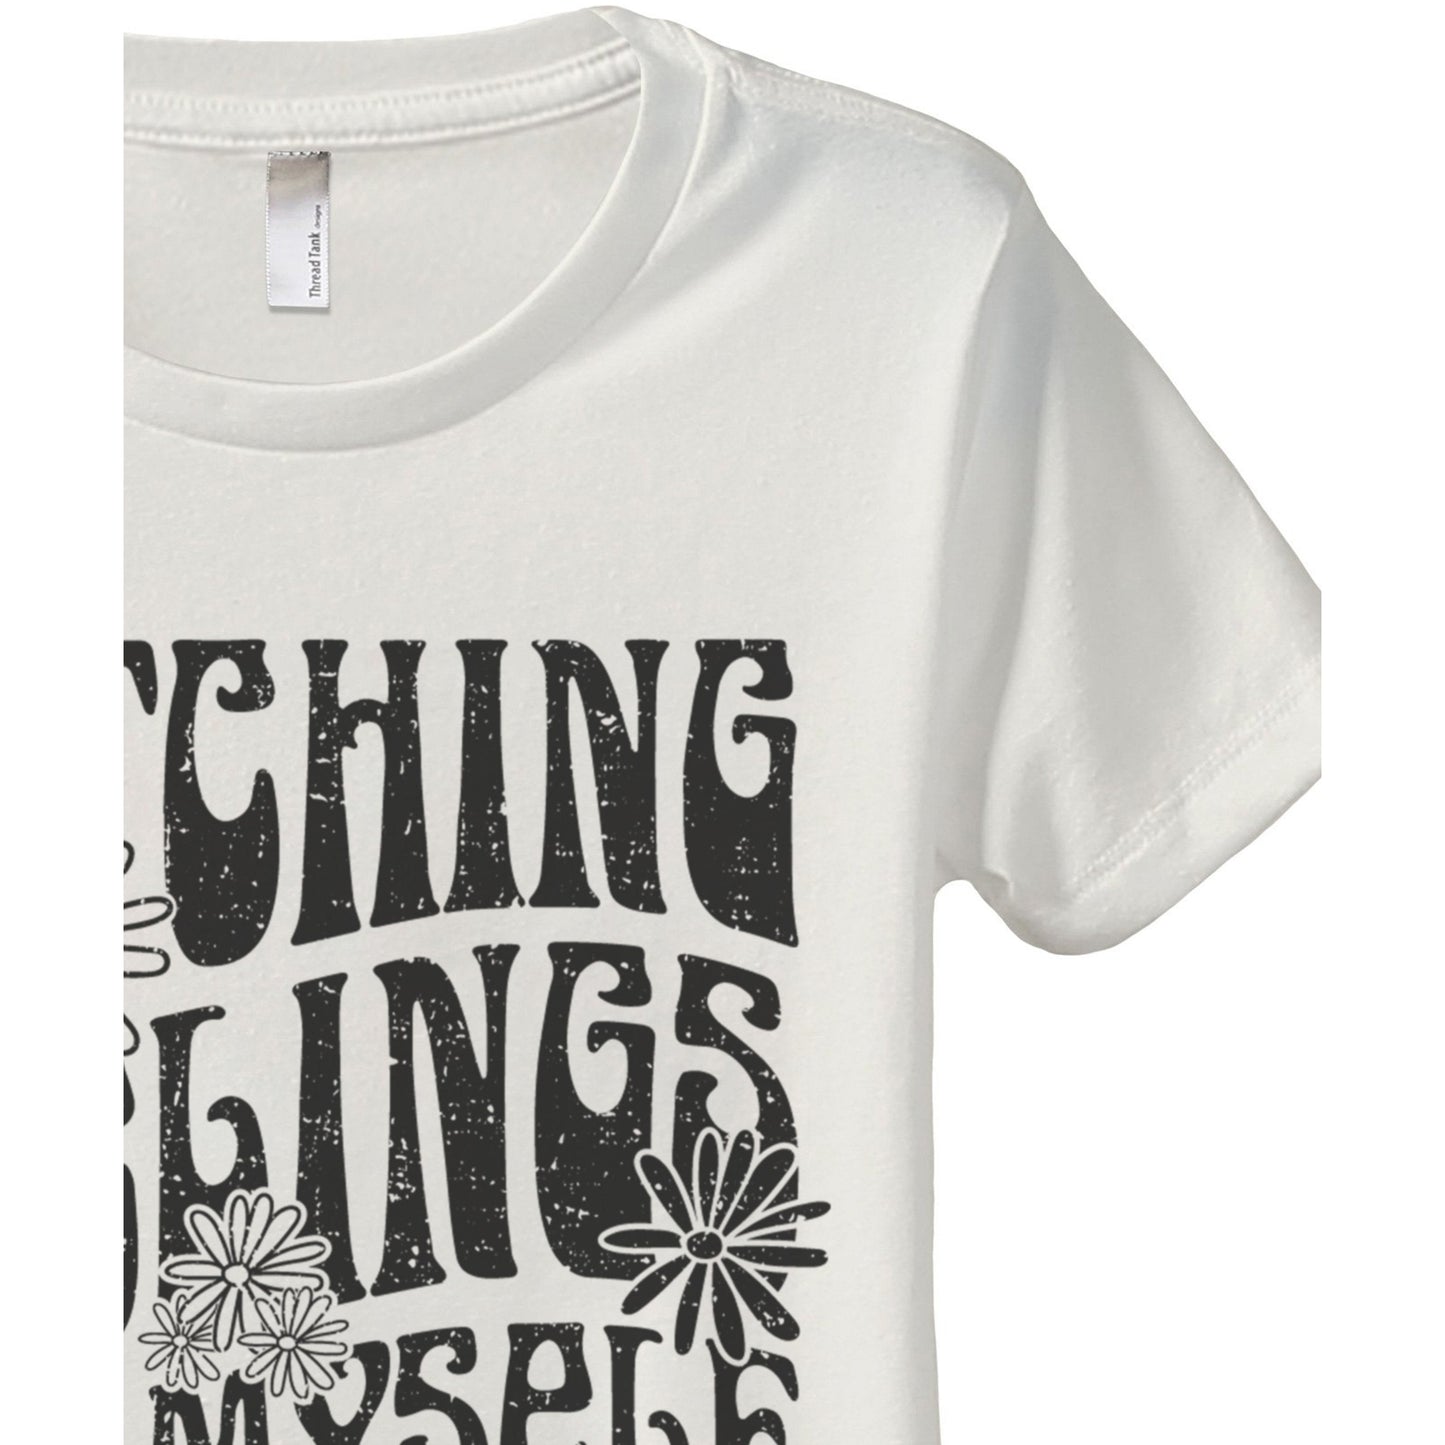 Catching Feelings For Myself Women's Relaxed Crewneck T-Shirt Top Tee Vintage White Zoom Details
